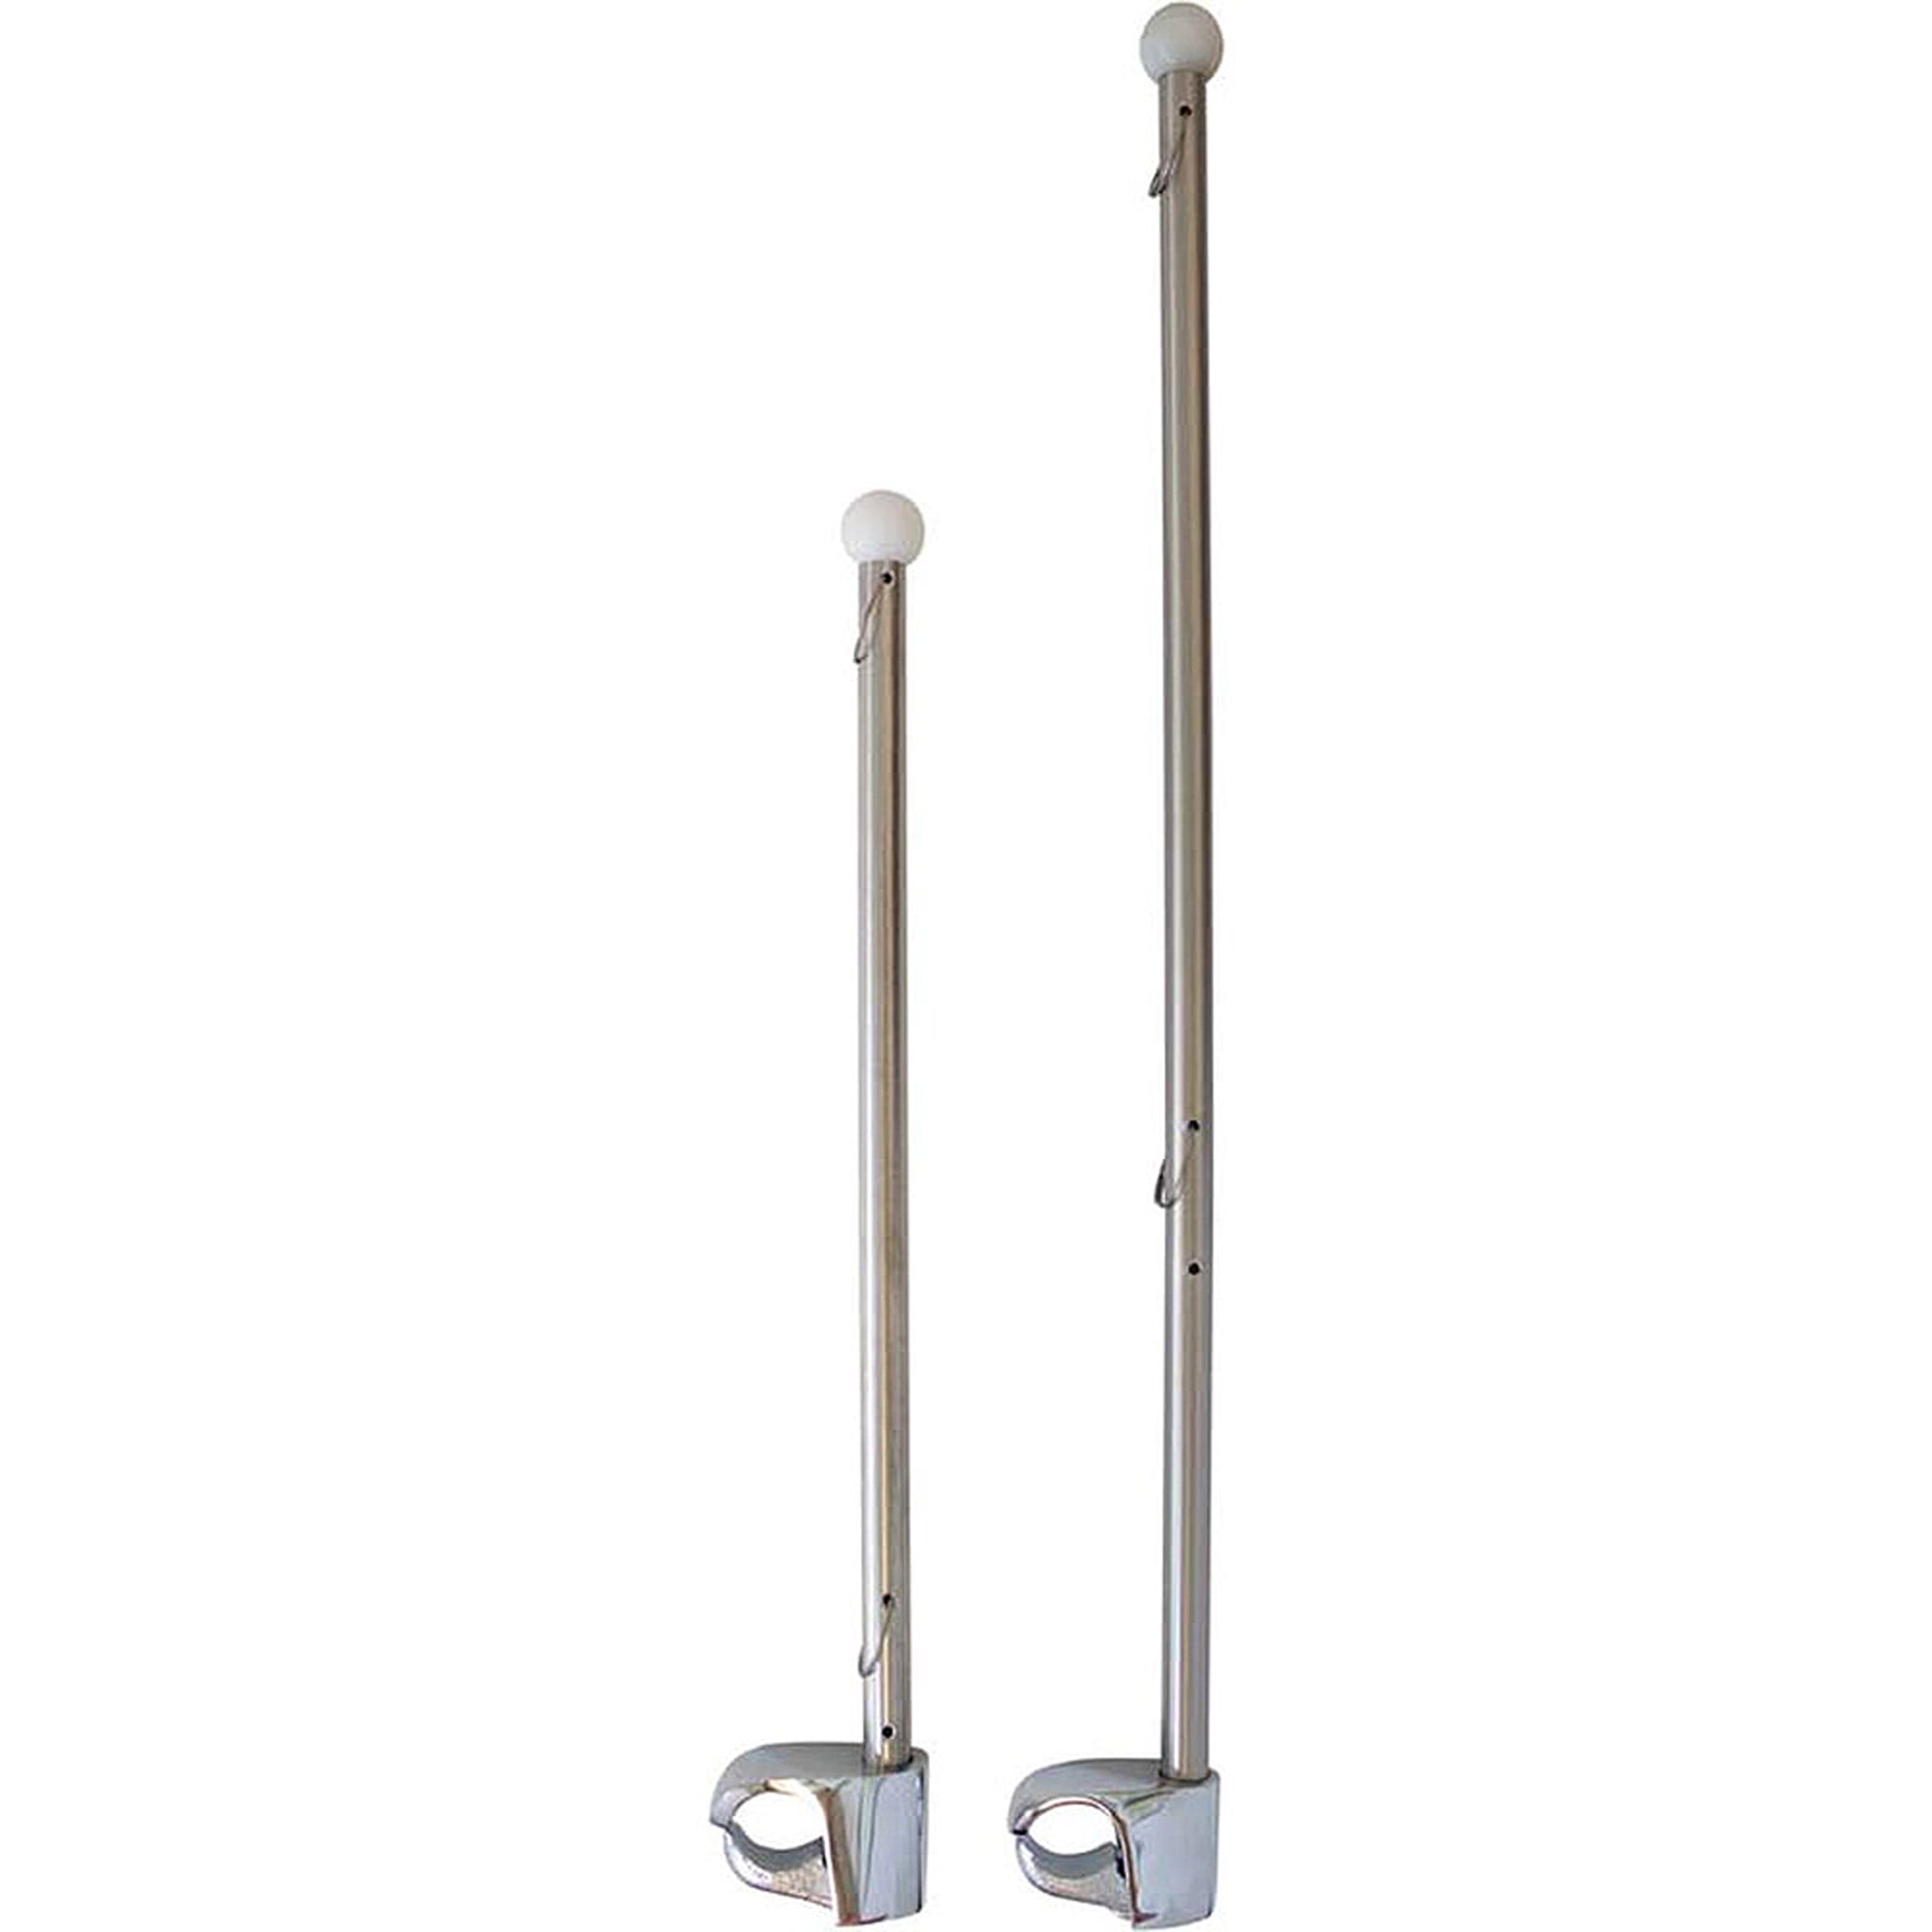 NEW Flag Pole w Round Rail Clamp-on for 7/8" rail  15"L  stainless  77001